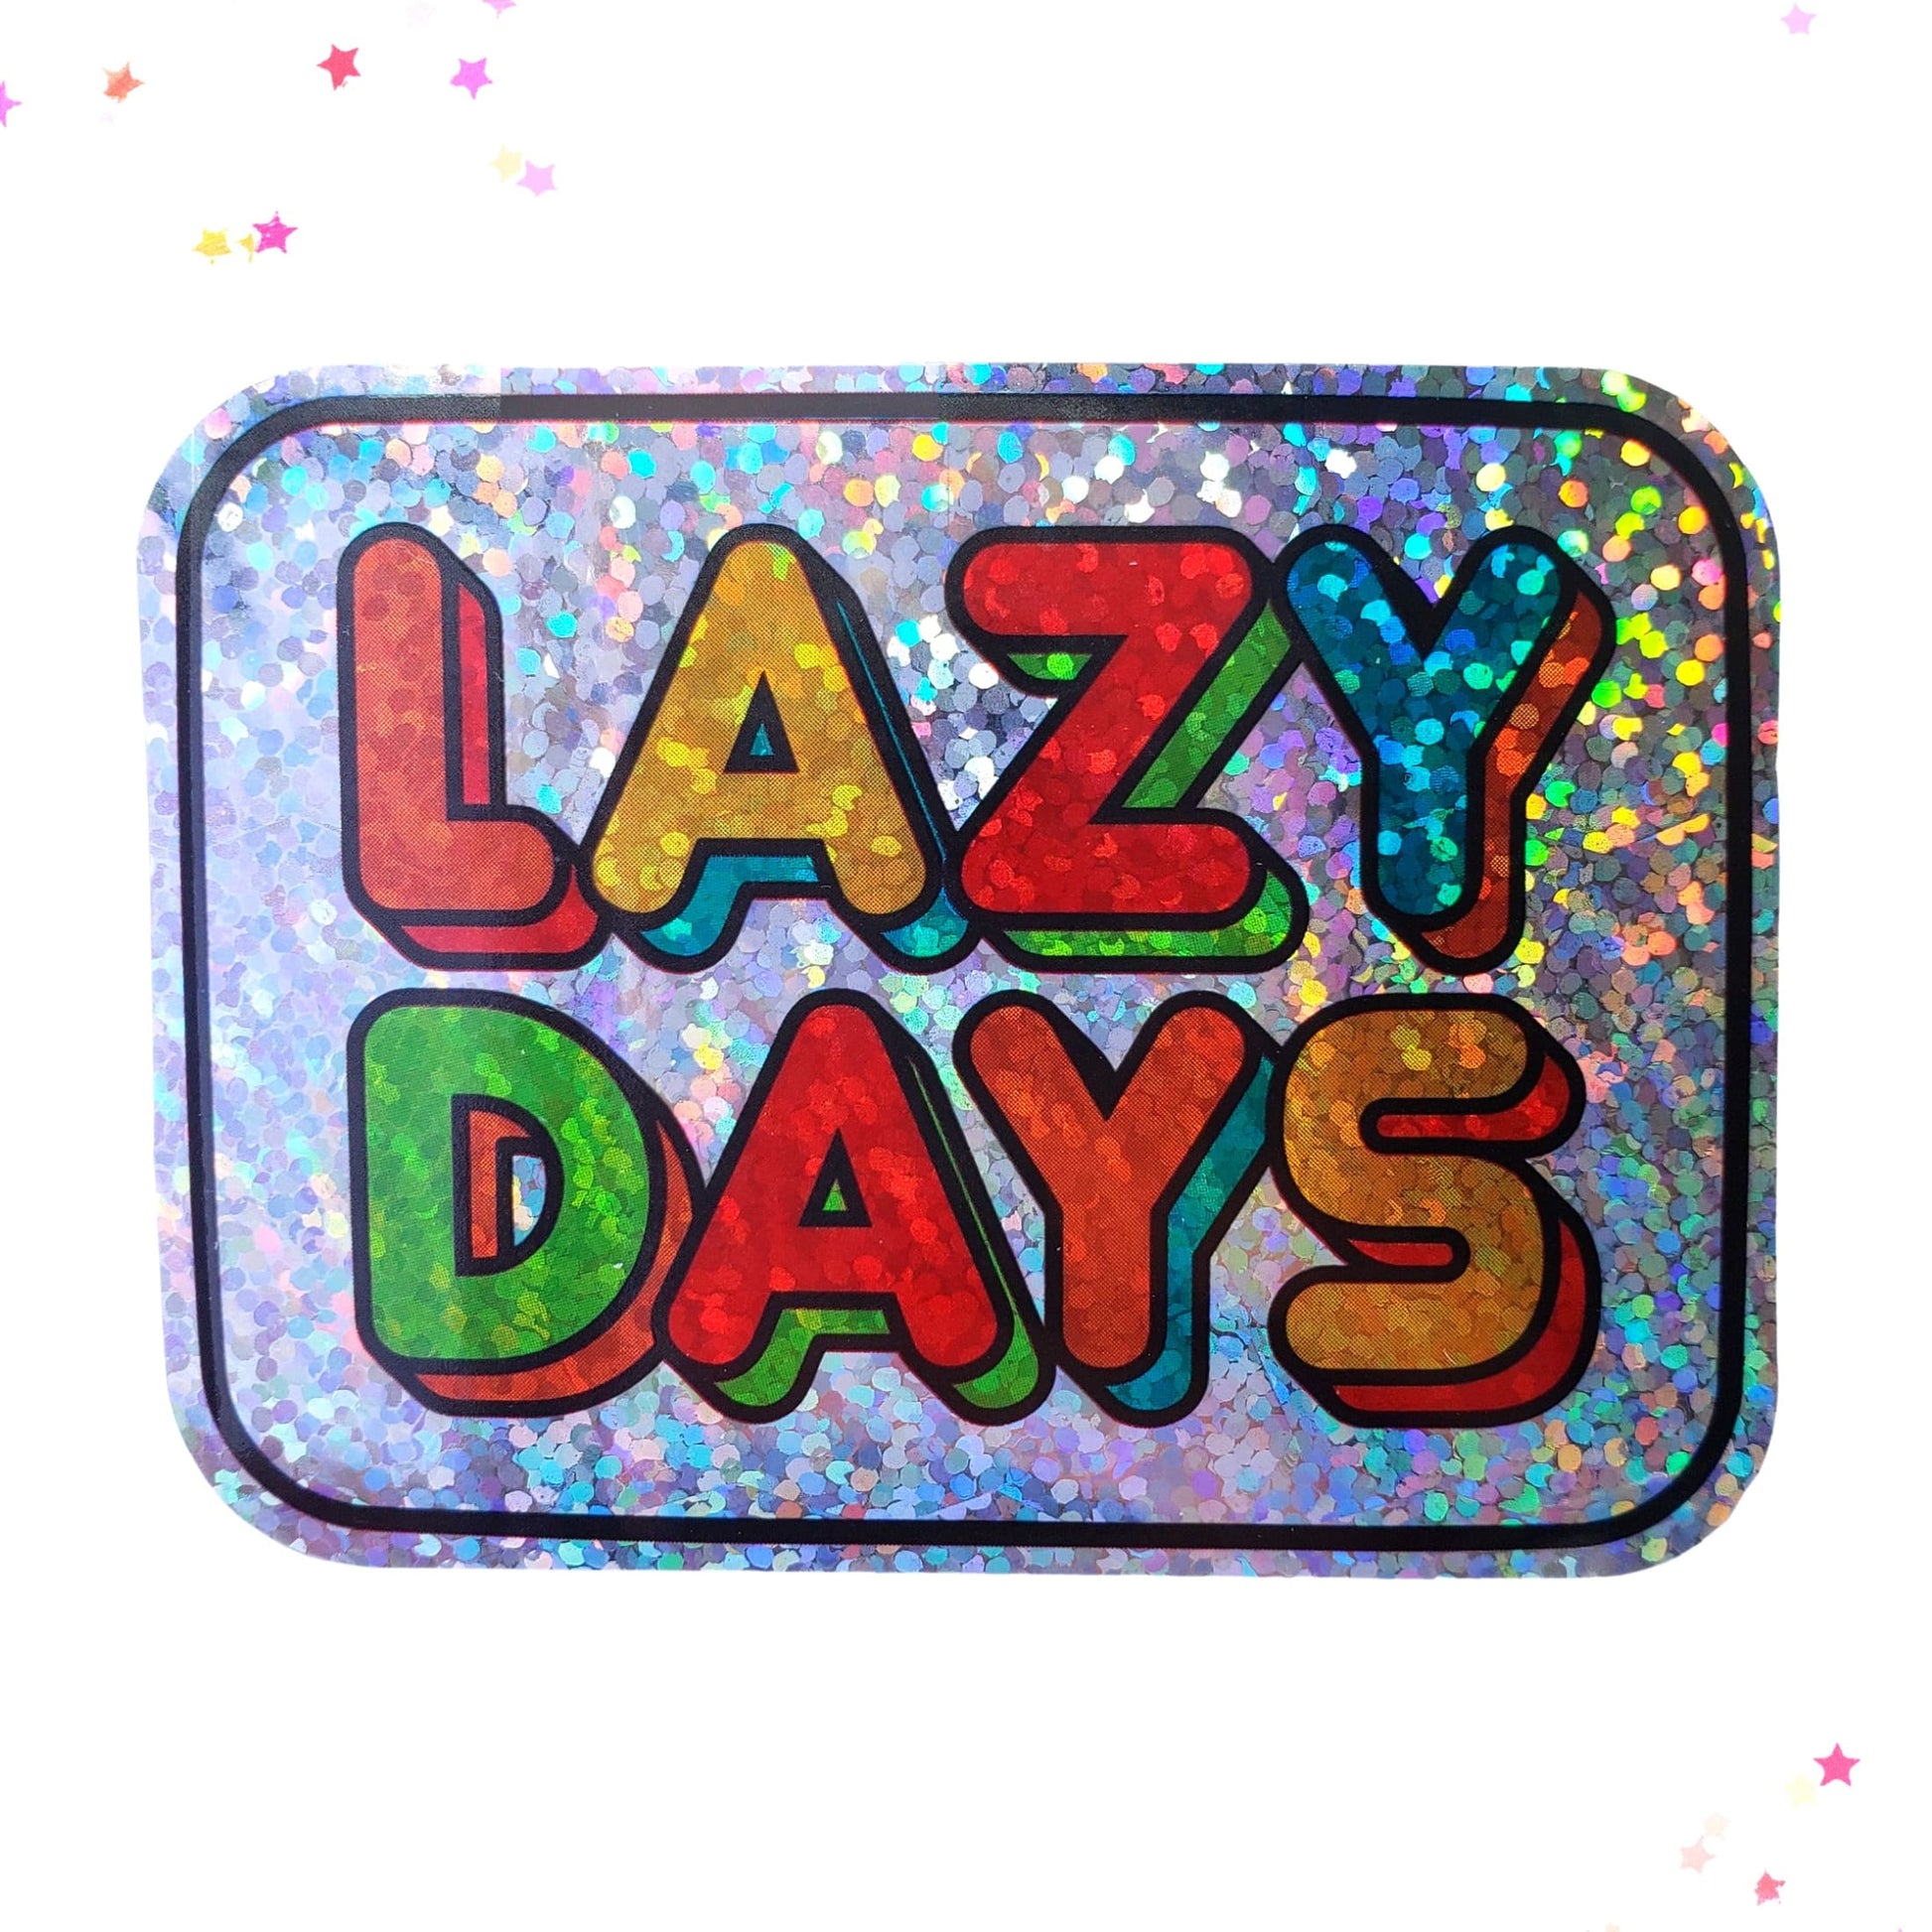 Premium Sticker - Sparkly Holographic Glitter Lazy Days from Confetti Kitty, Only 2.00